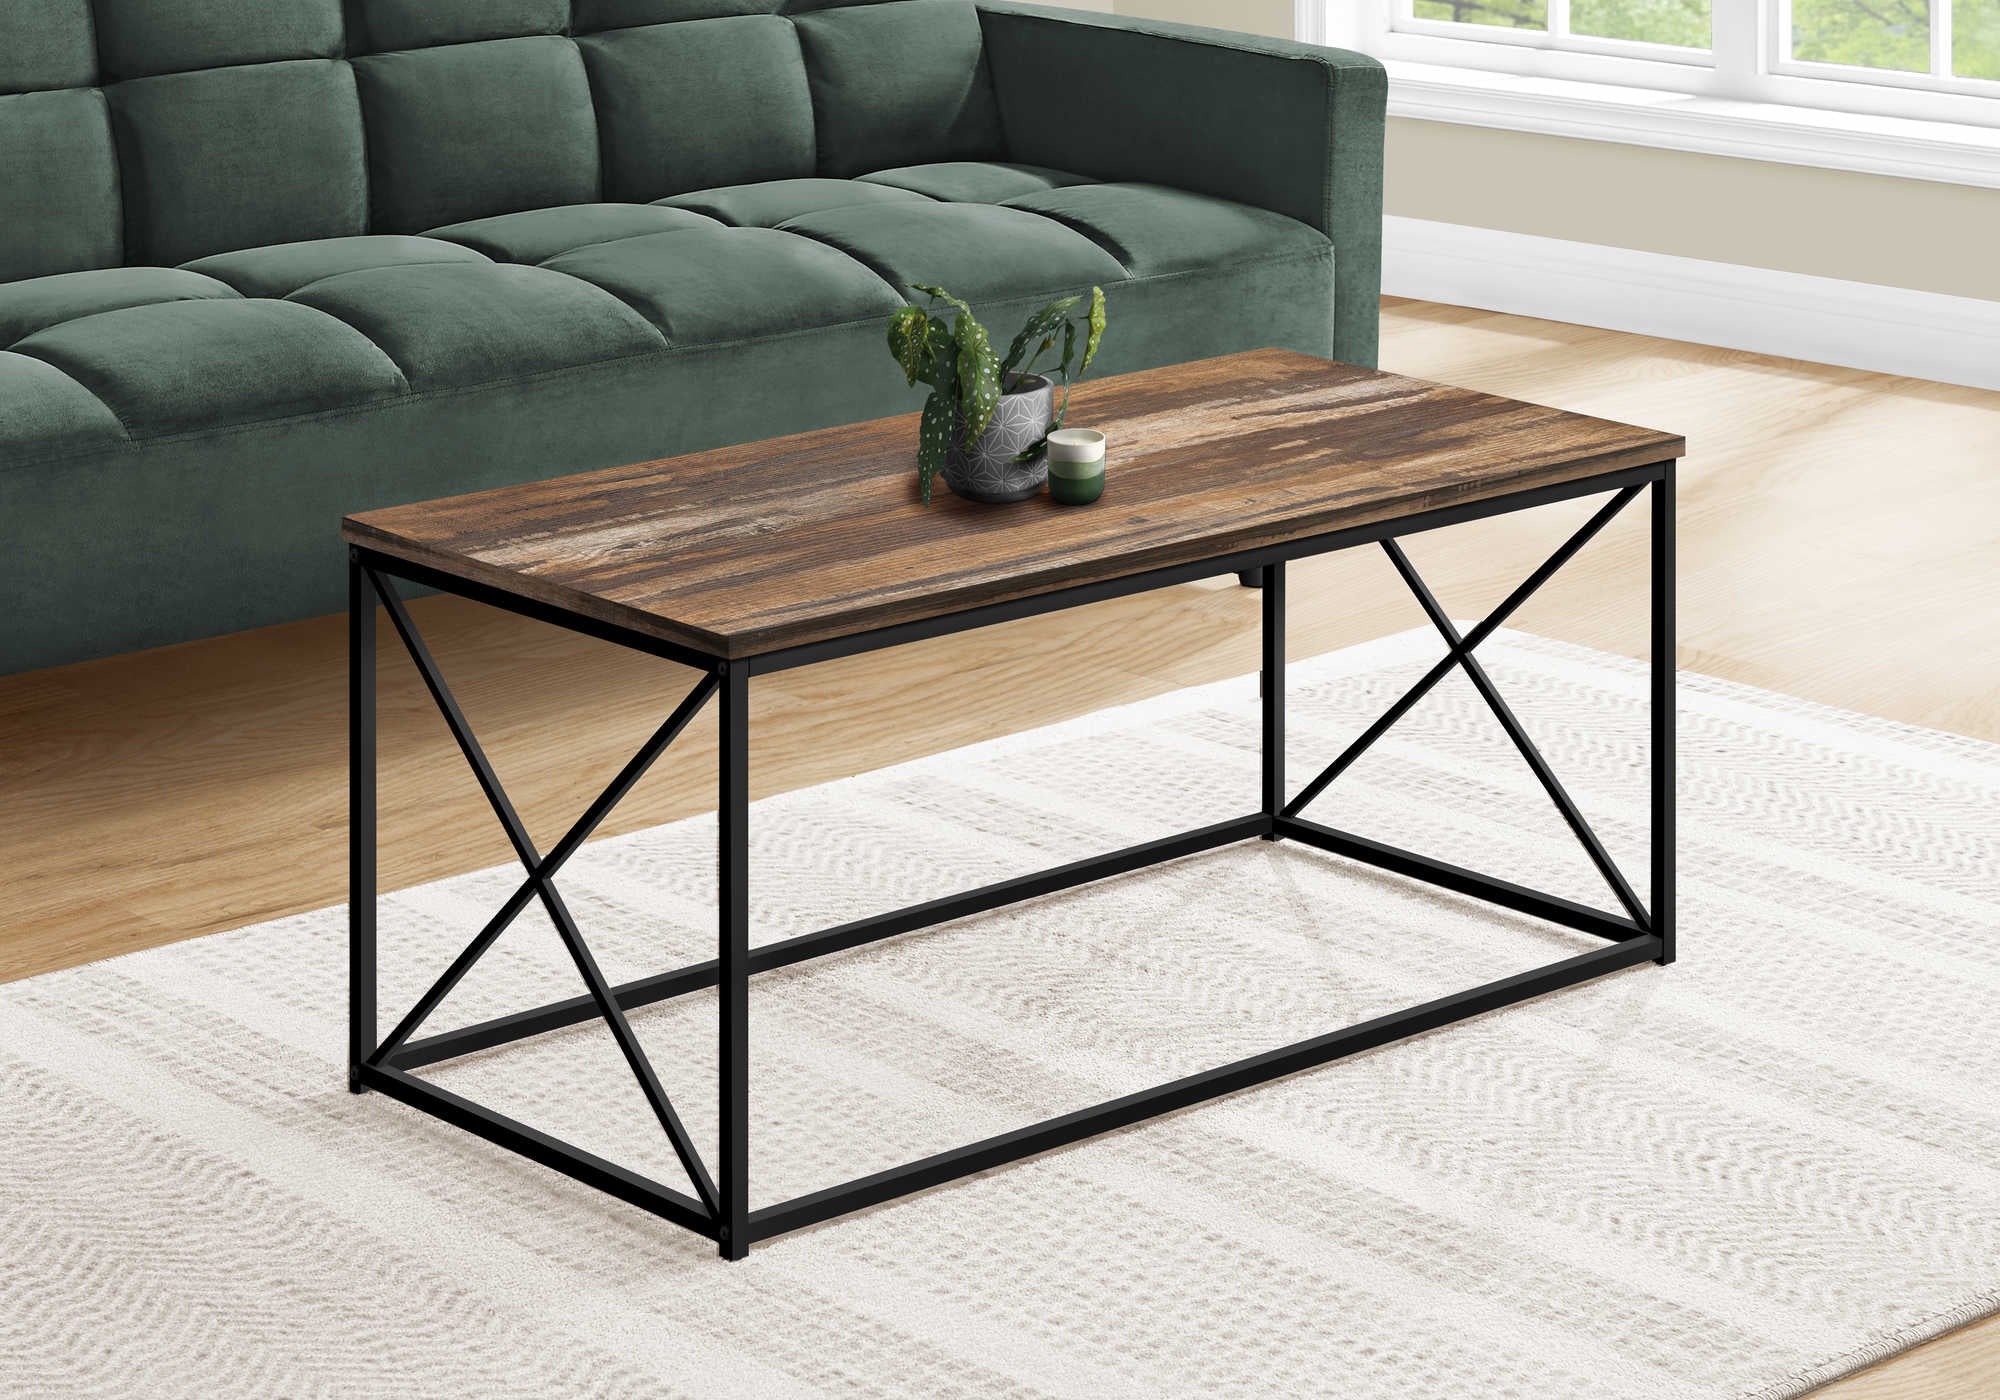 I 3784 - COFFEE TABLE - 40"L / BROWN RECLAIMED / BLACK METAL BY MONARCH SPECIALTIES INC